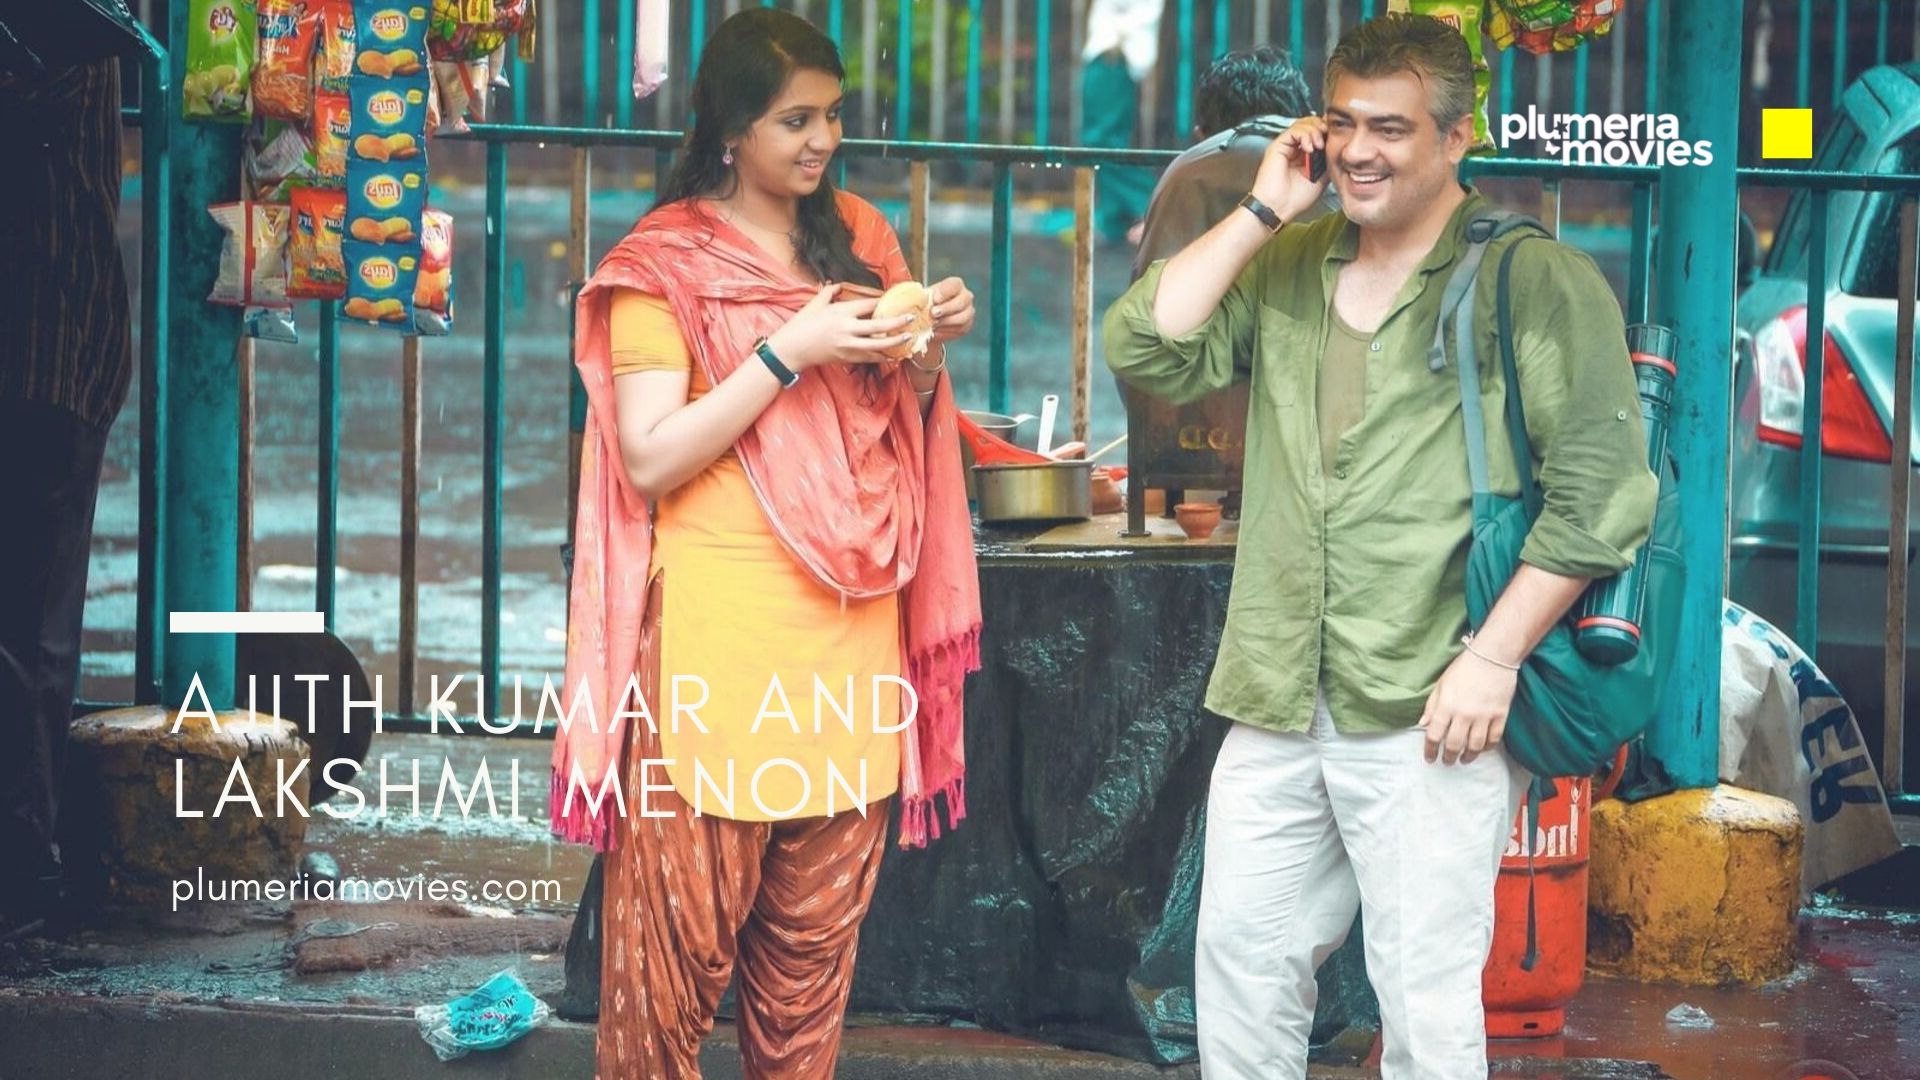 Ajith Kumar And Lakshmi Menon In Vedalam Movie Photos Stills And Images Vedhalam movie song free mp3 download. ajith kumar and lakshmi menon in